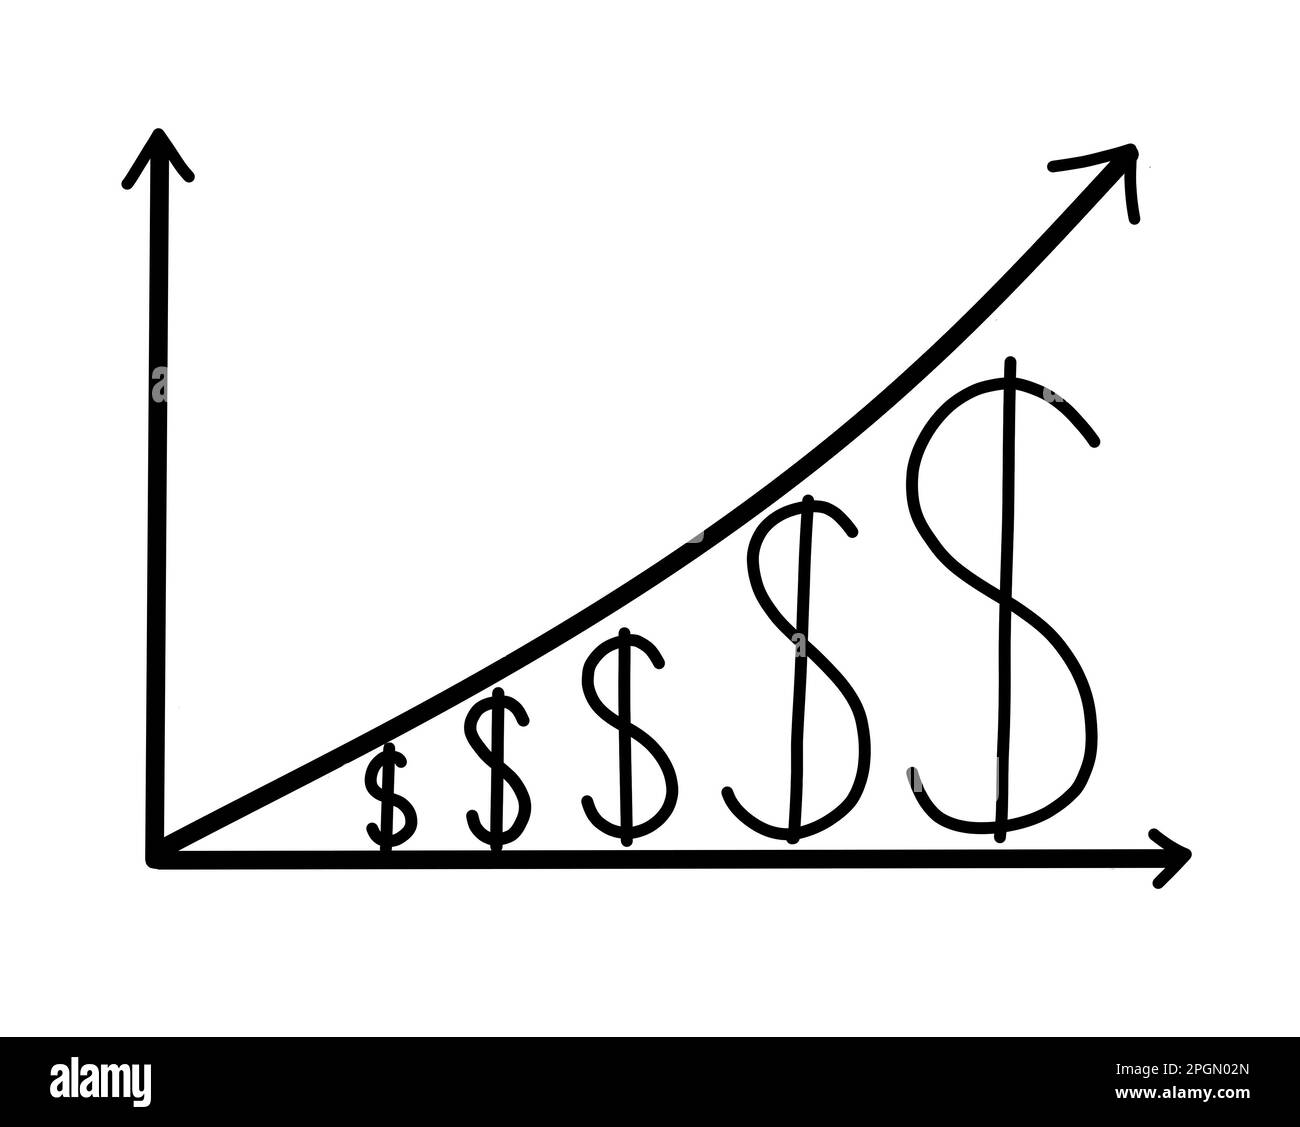 Money finance growth or inflation concept. A chart of US dollar price with an arrow grow up. Black and white illustration. Stock Photo